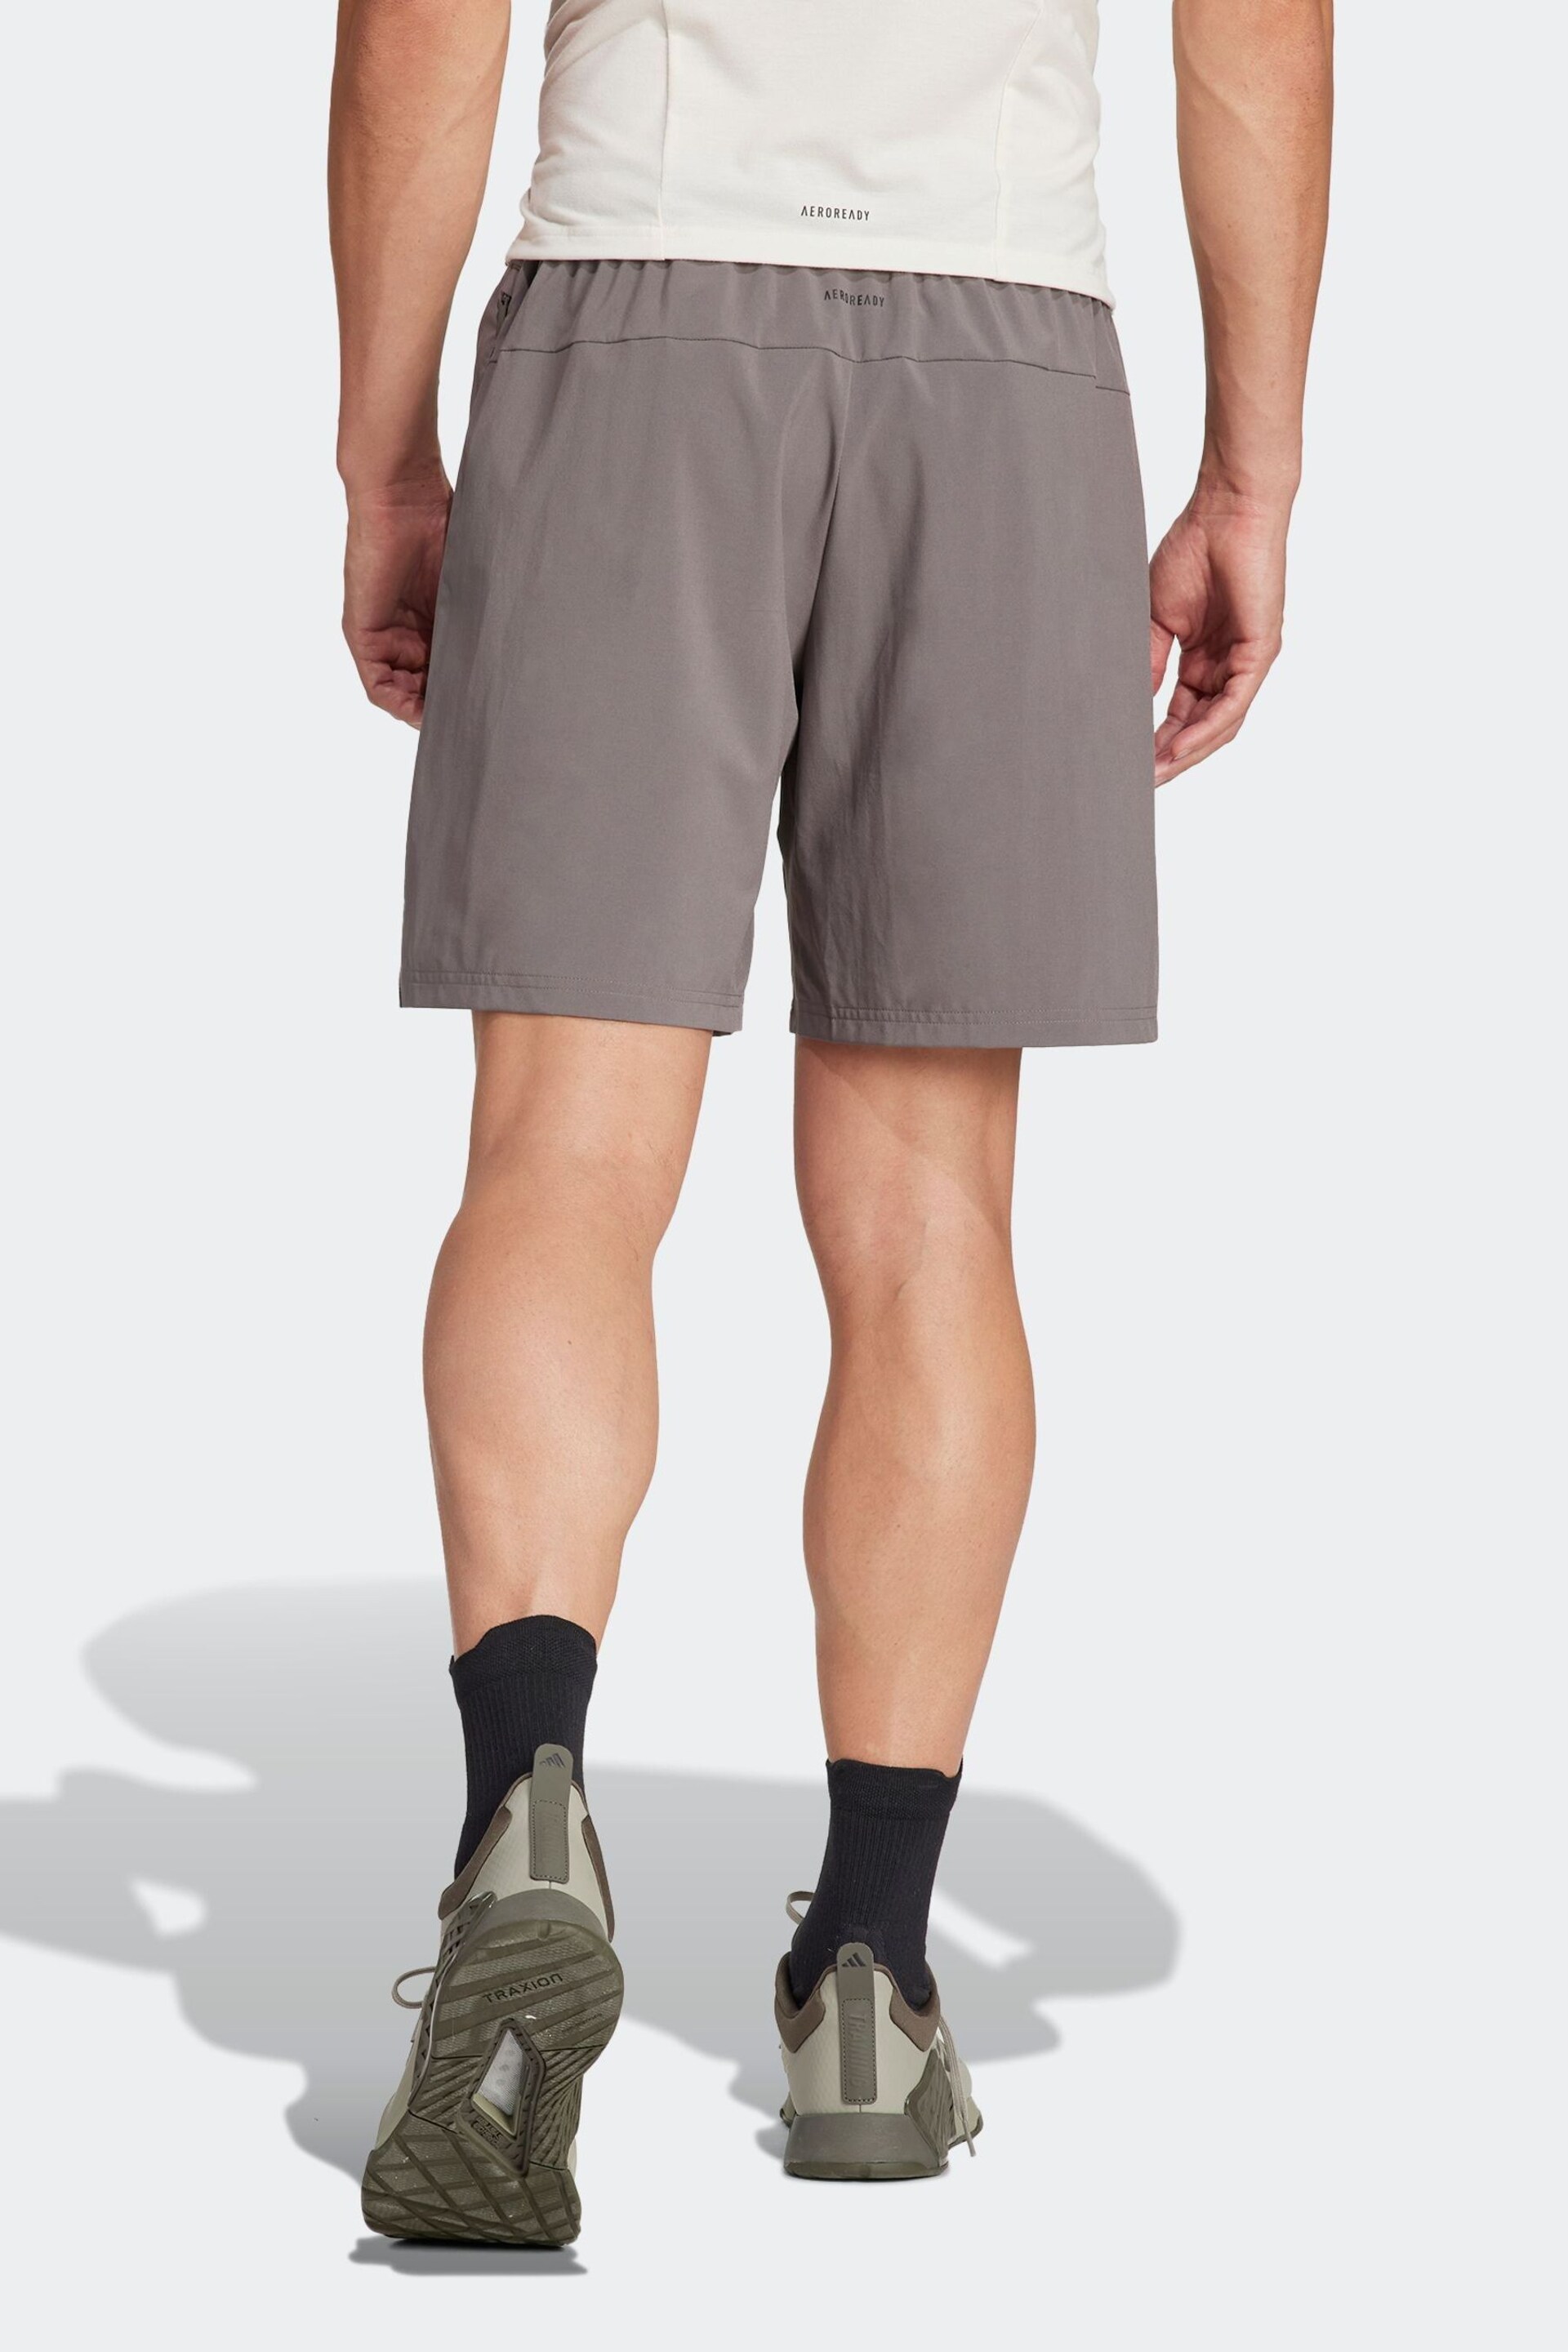 adidas Brown Designed for Training Workout Shorts - Image 2 of 6